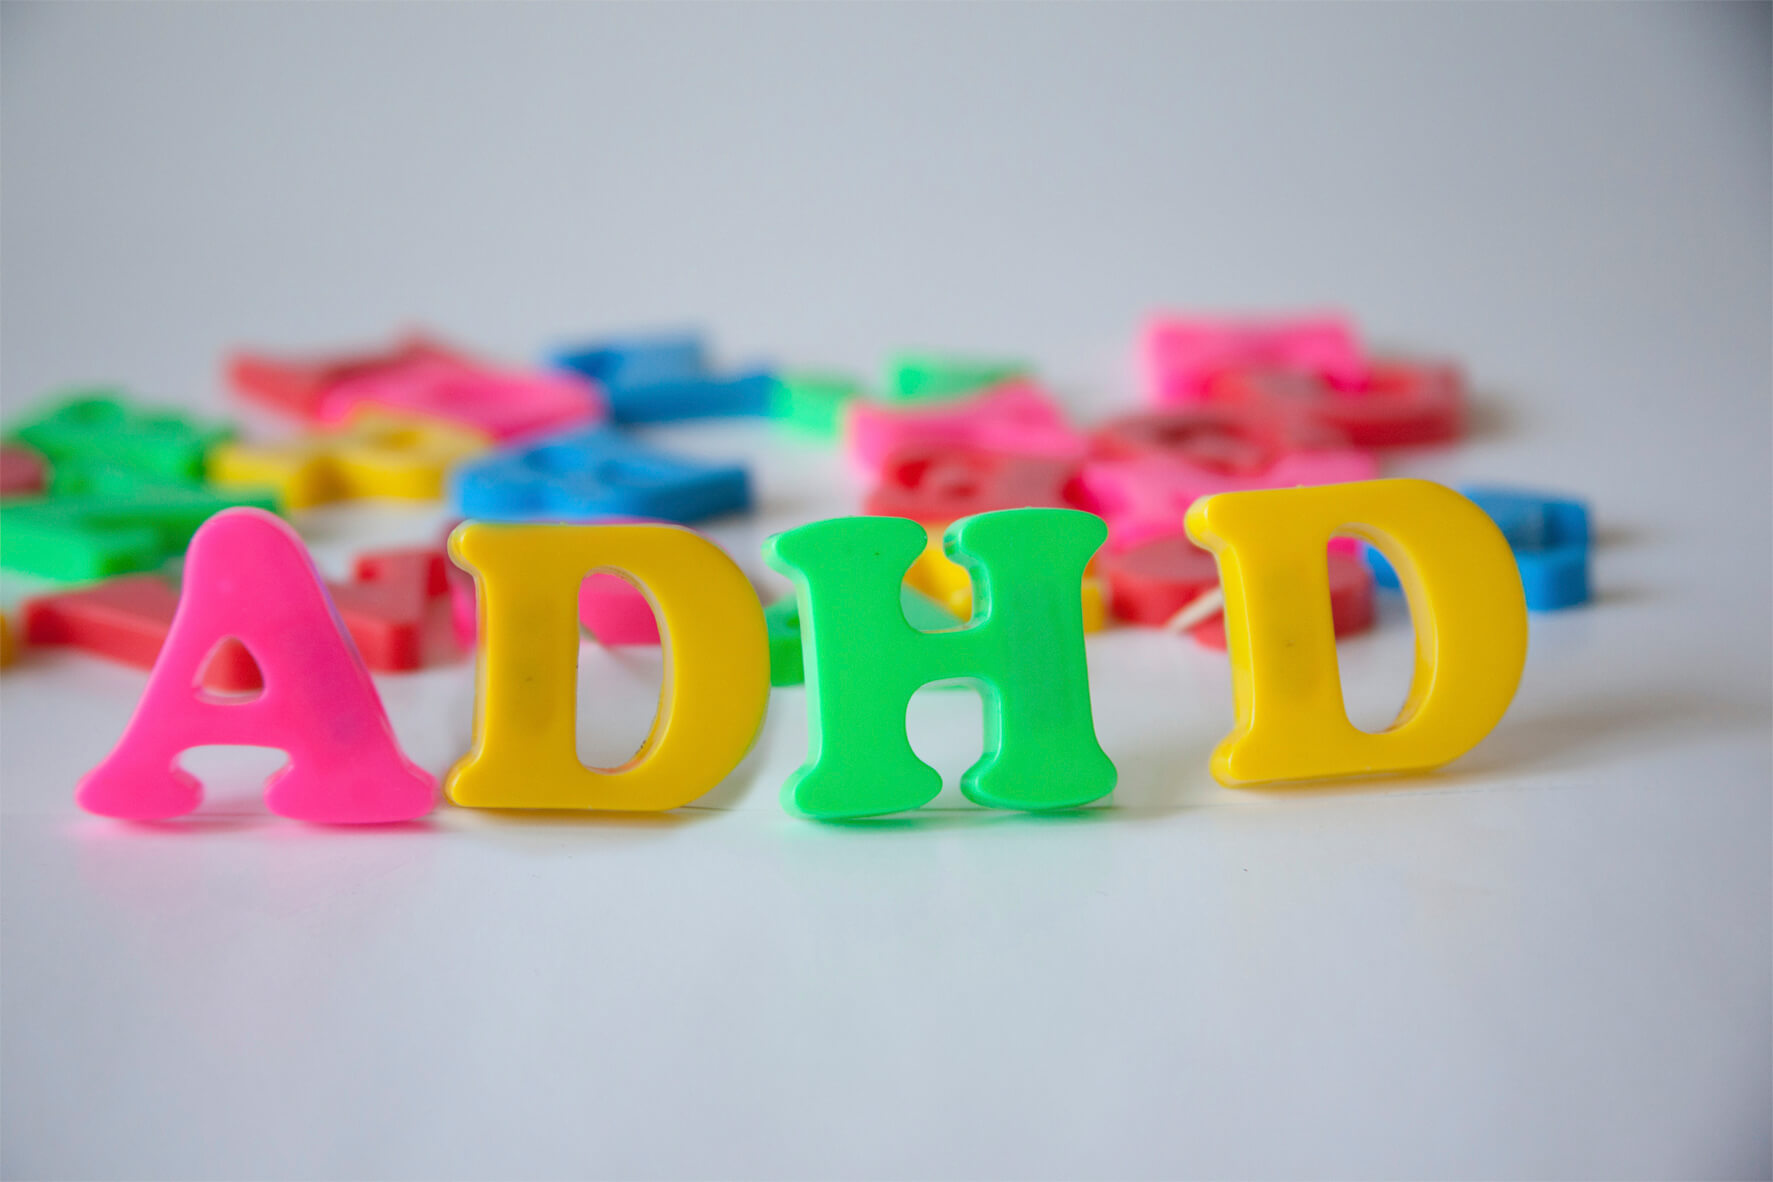 colour-letters-adhd